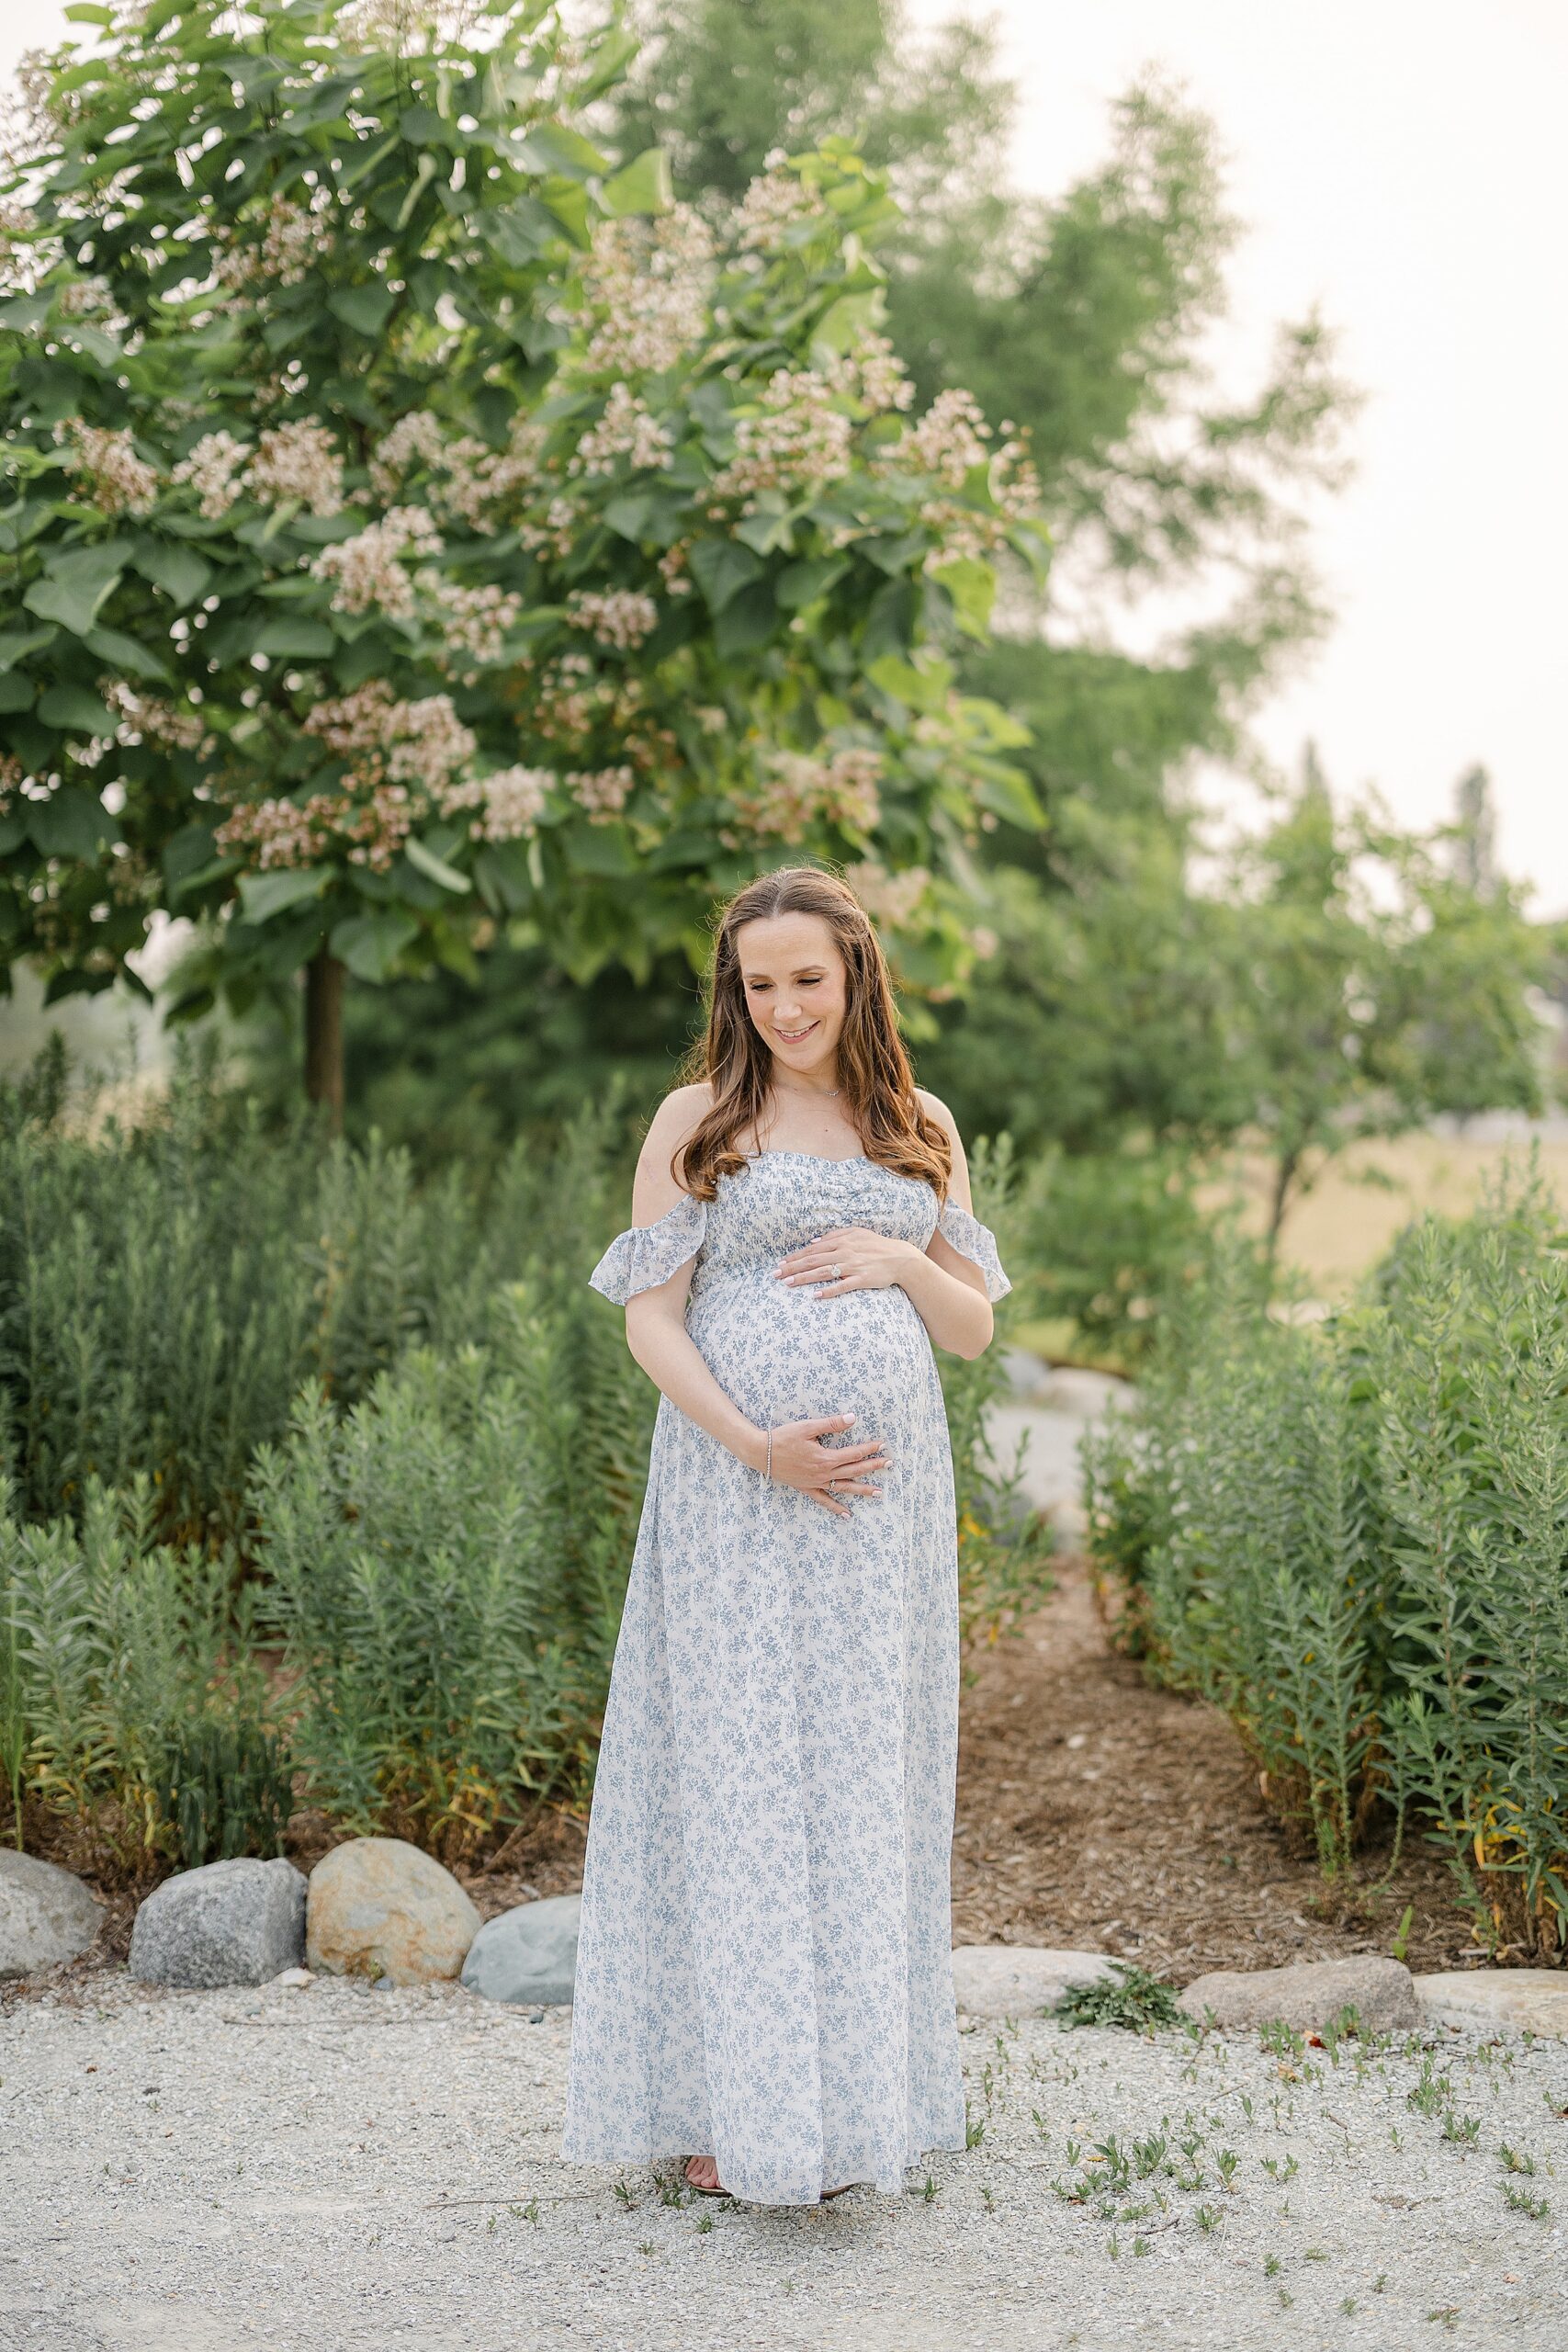 A pregnant woman in a floral print dress holds her bump while standing in a garden path